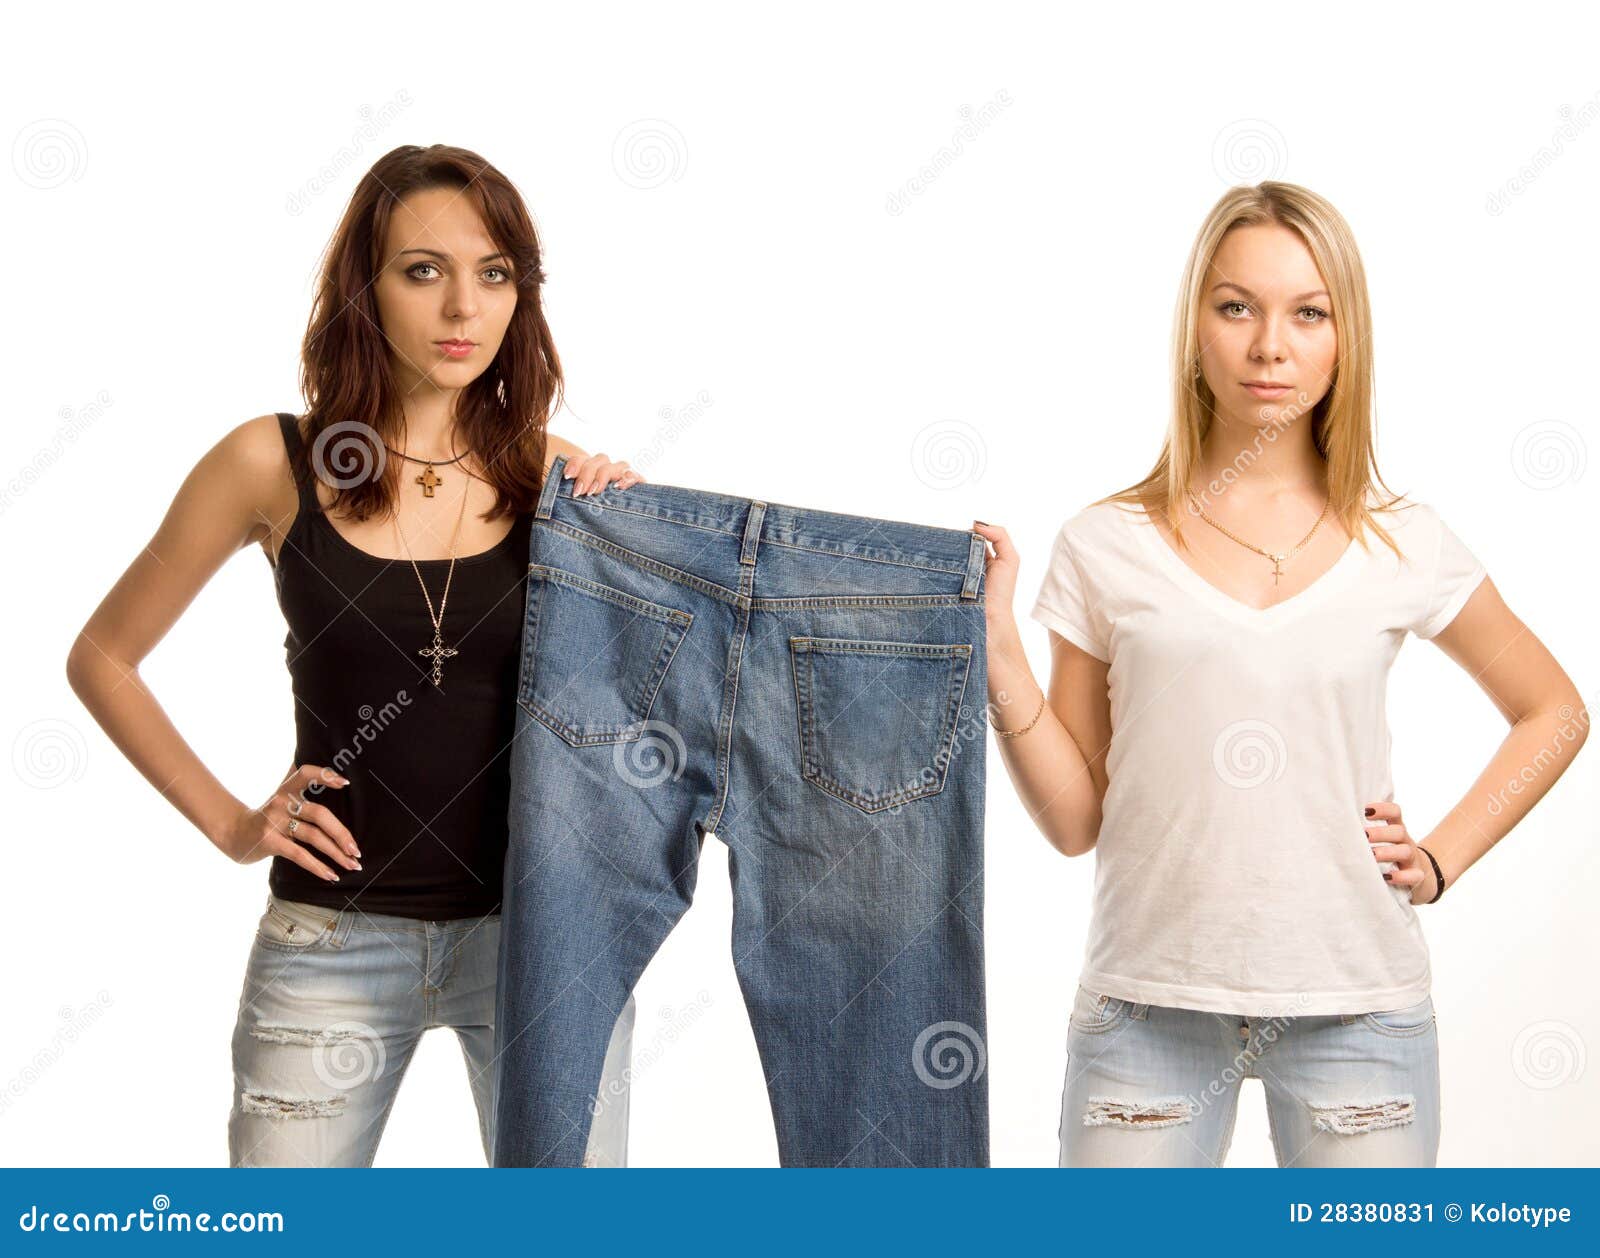 Teens In Tight Jeans Pics